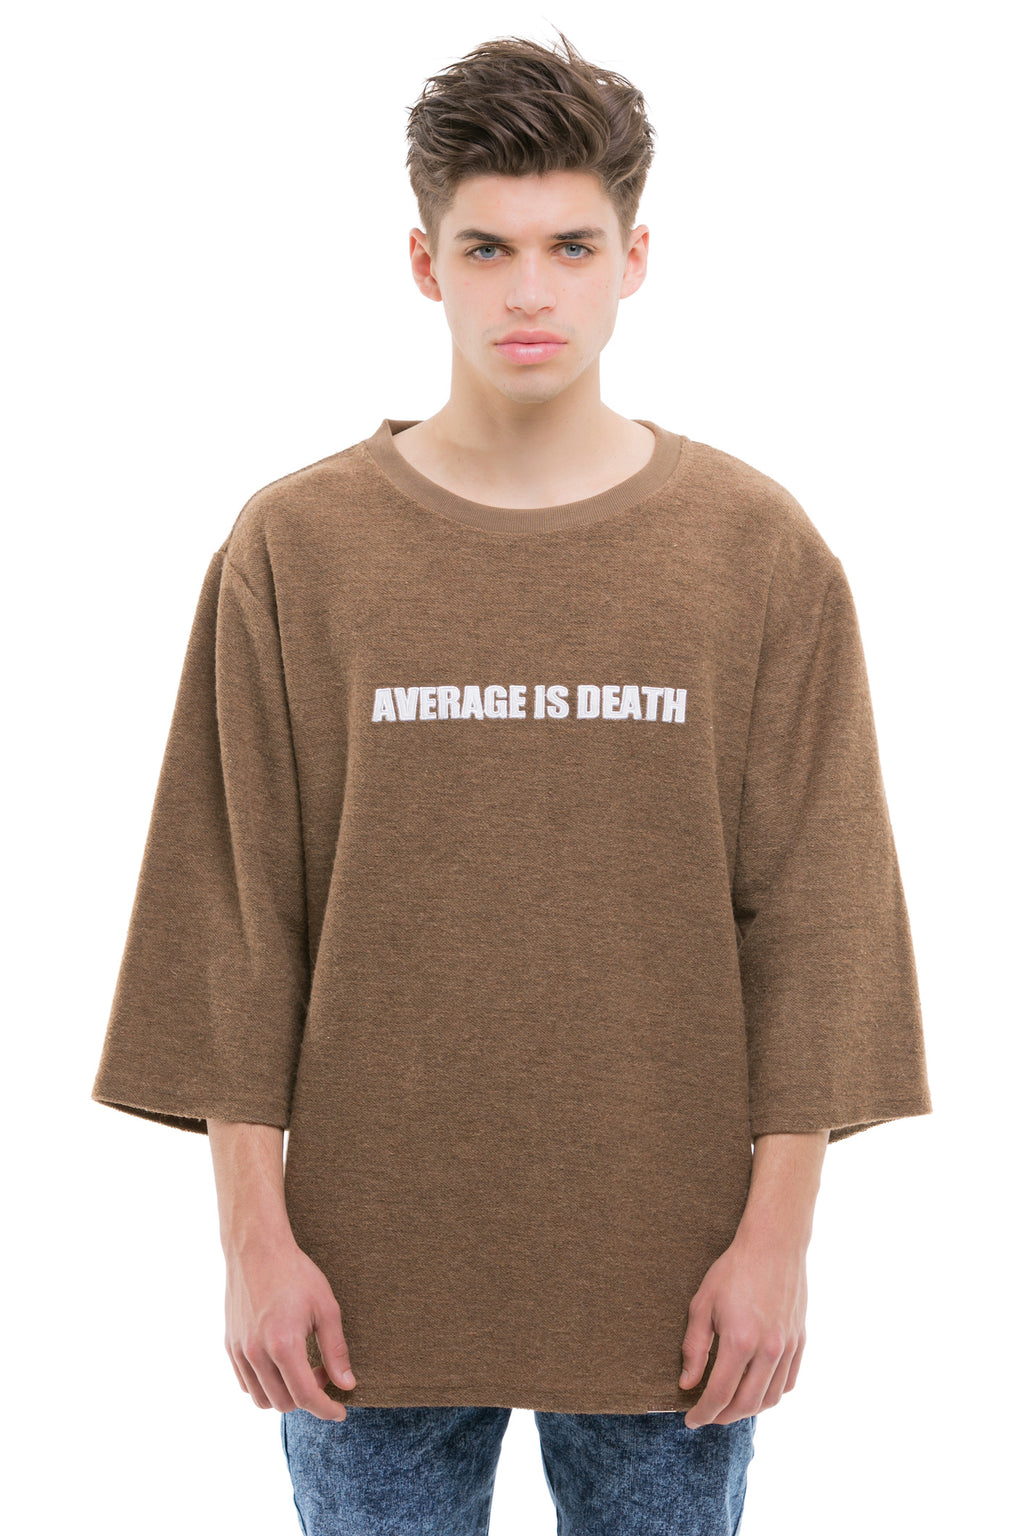 Average Is Death Quoted T-Shirt With Finished With A Ribbed Neck - Front View